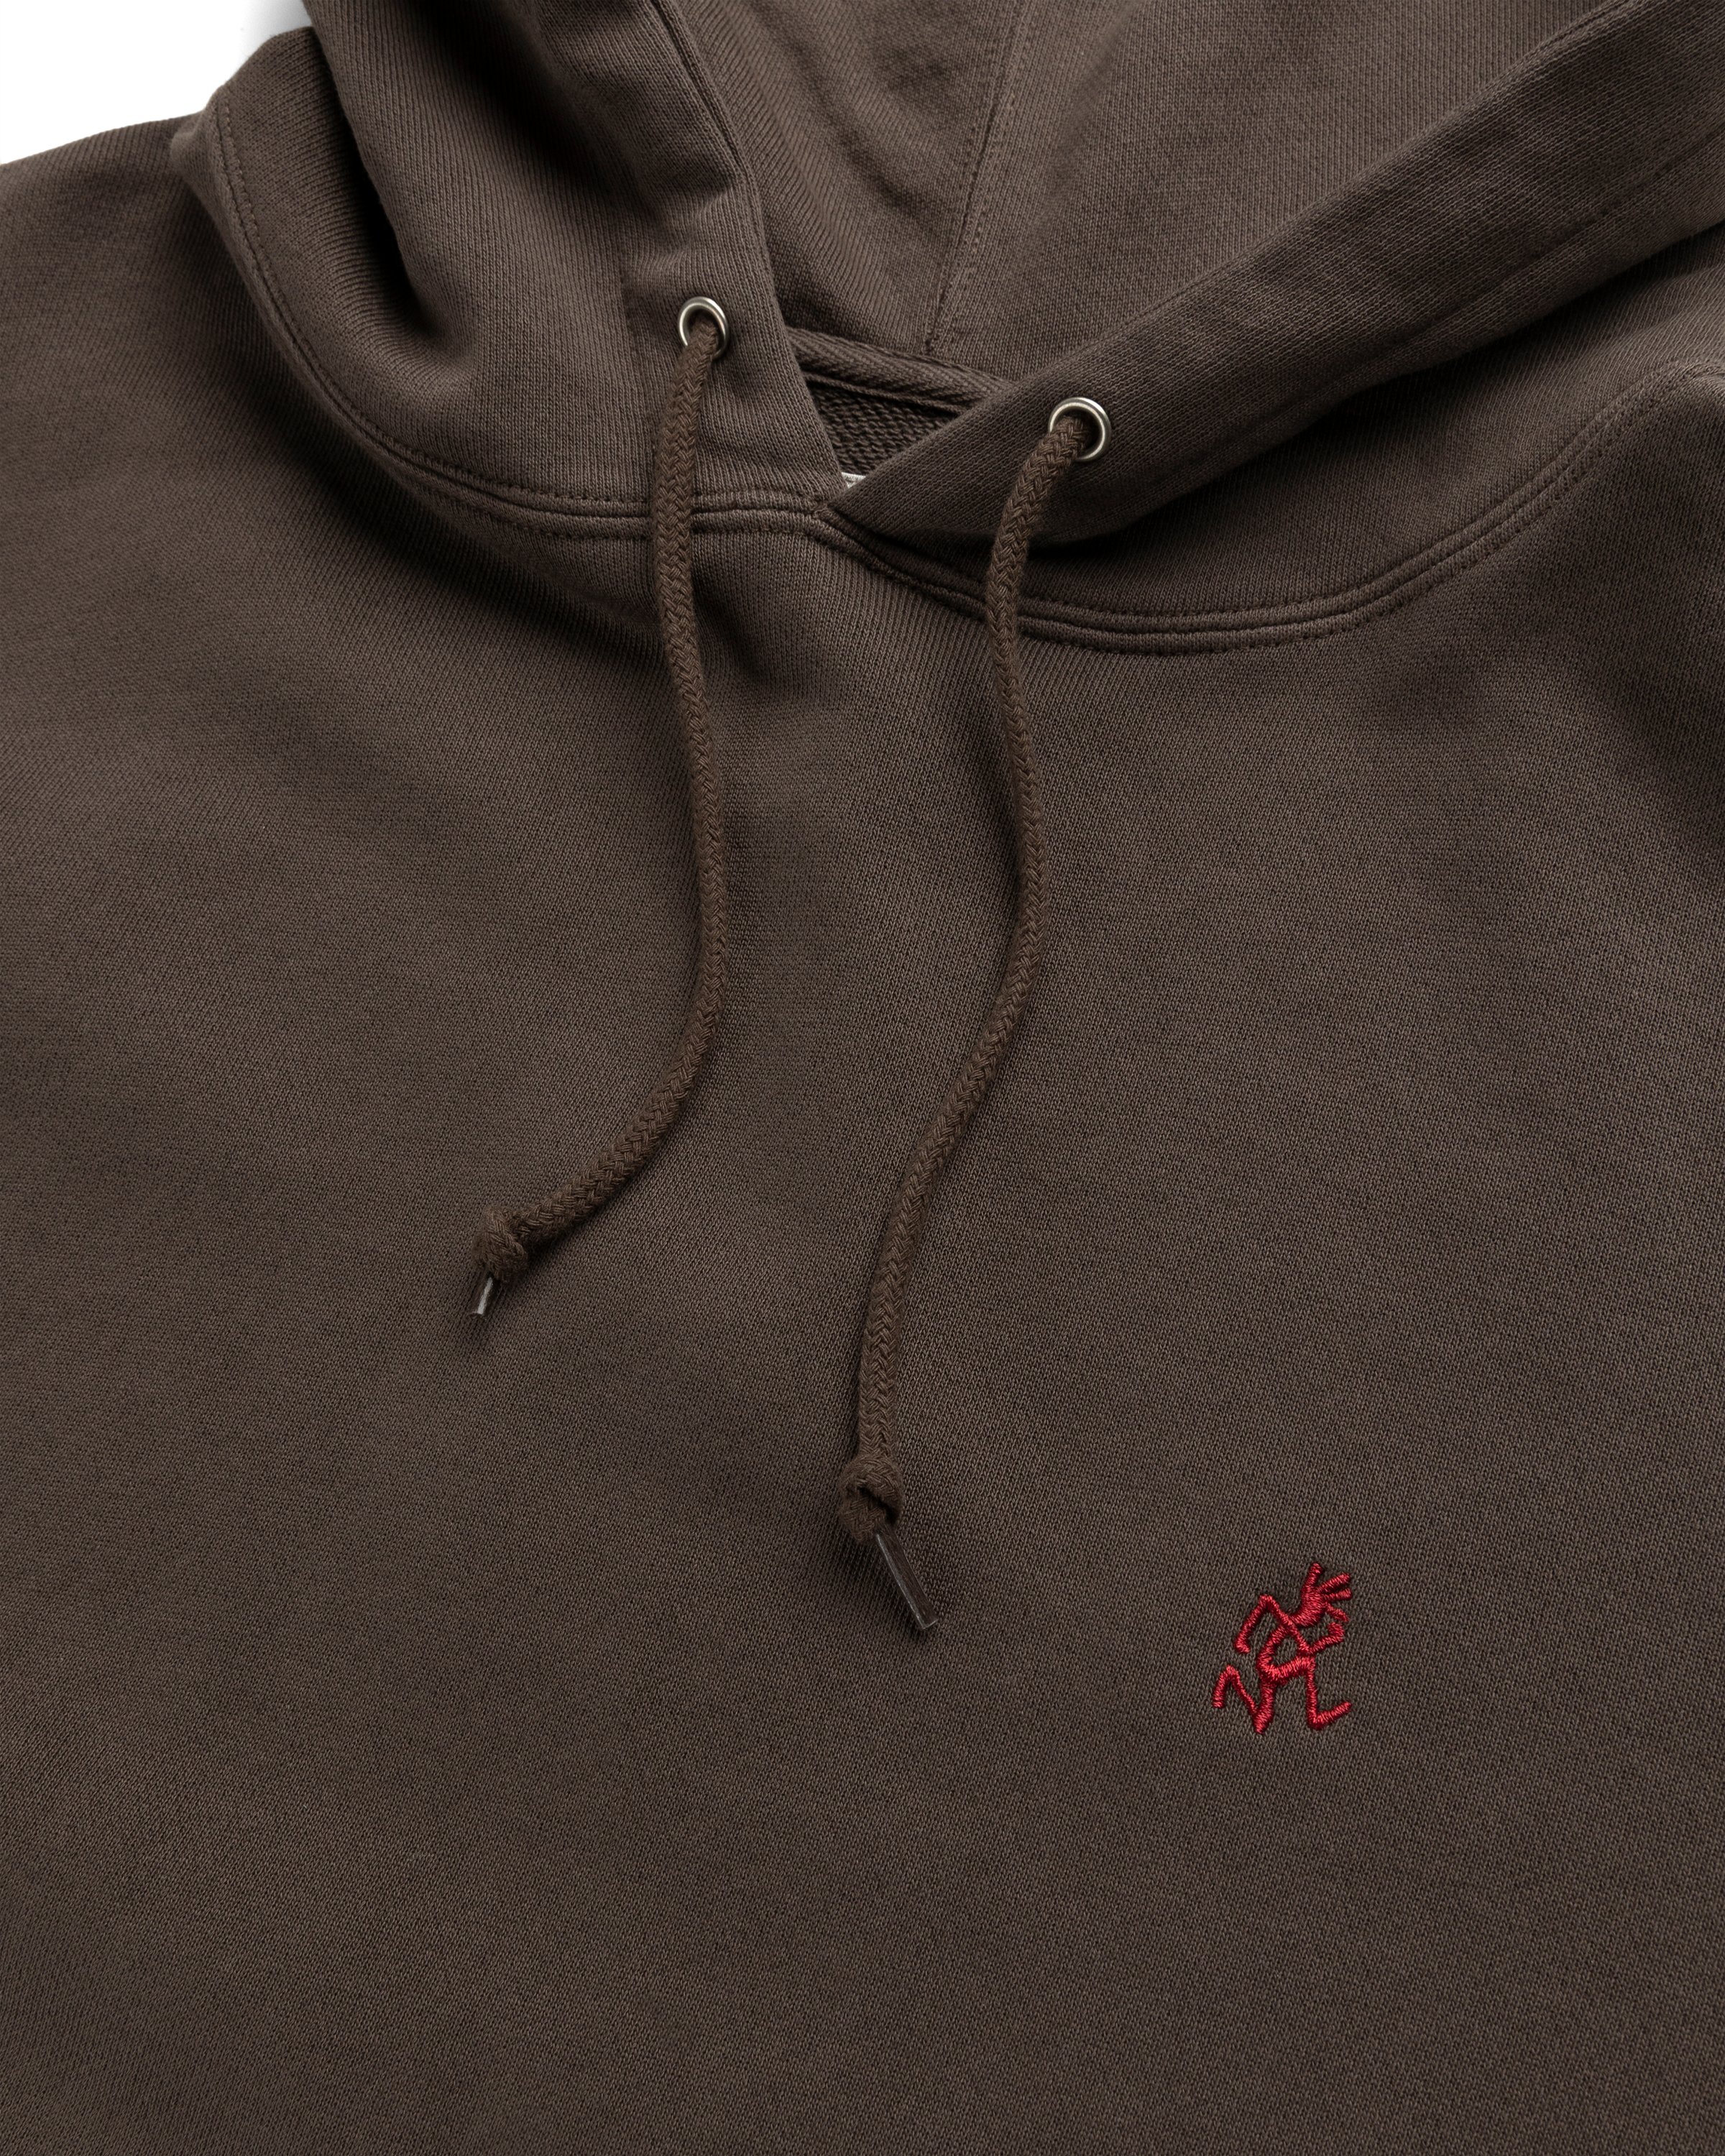 Gramicci - One Point Hooded Sweatshirt Brown Pigment - Clothing - Brown - Image 3